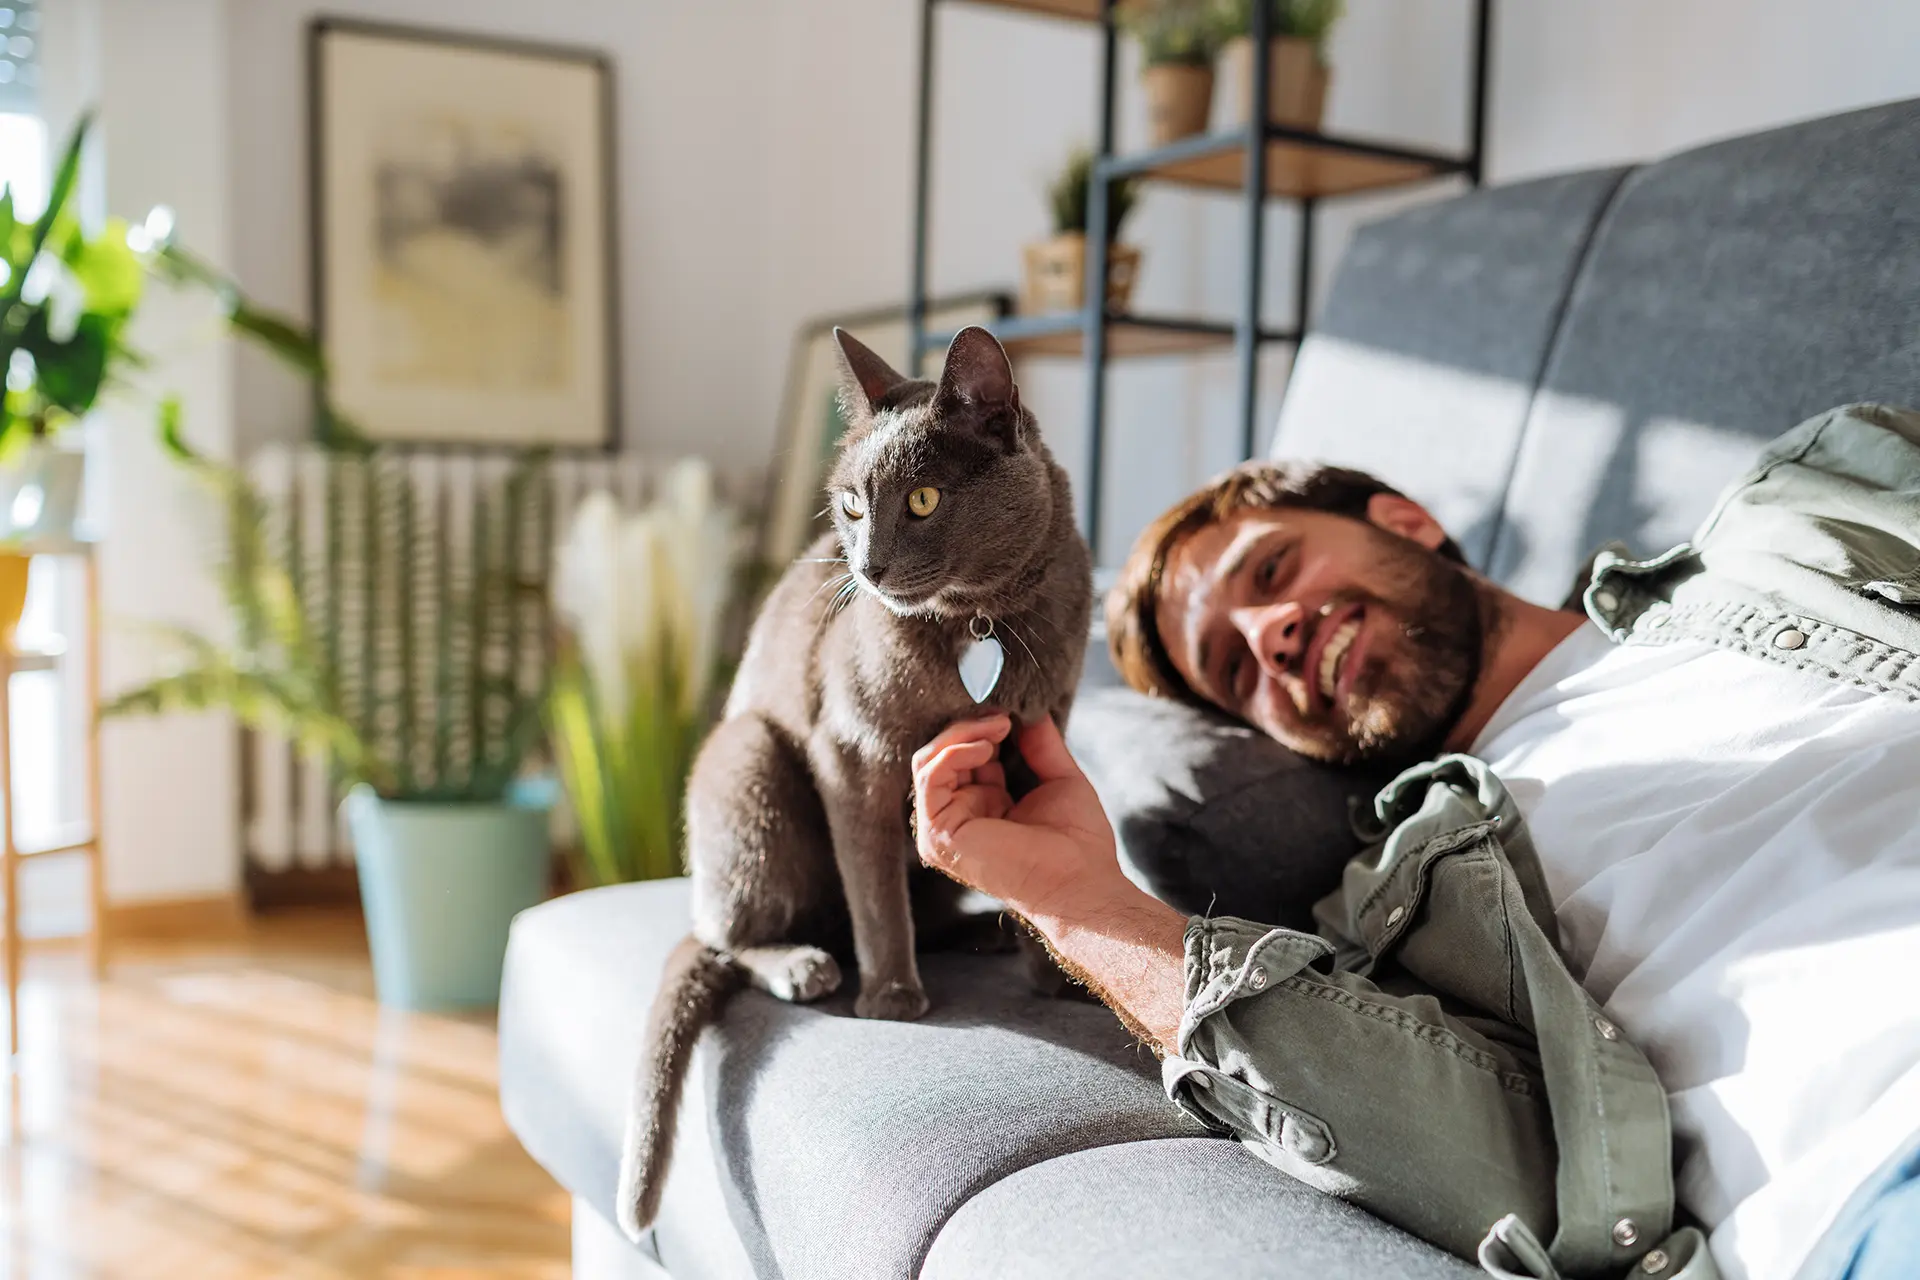 Man lying on a couch petting a cat